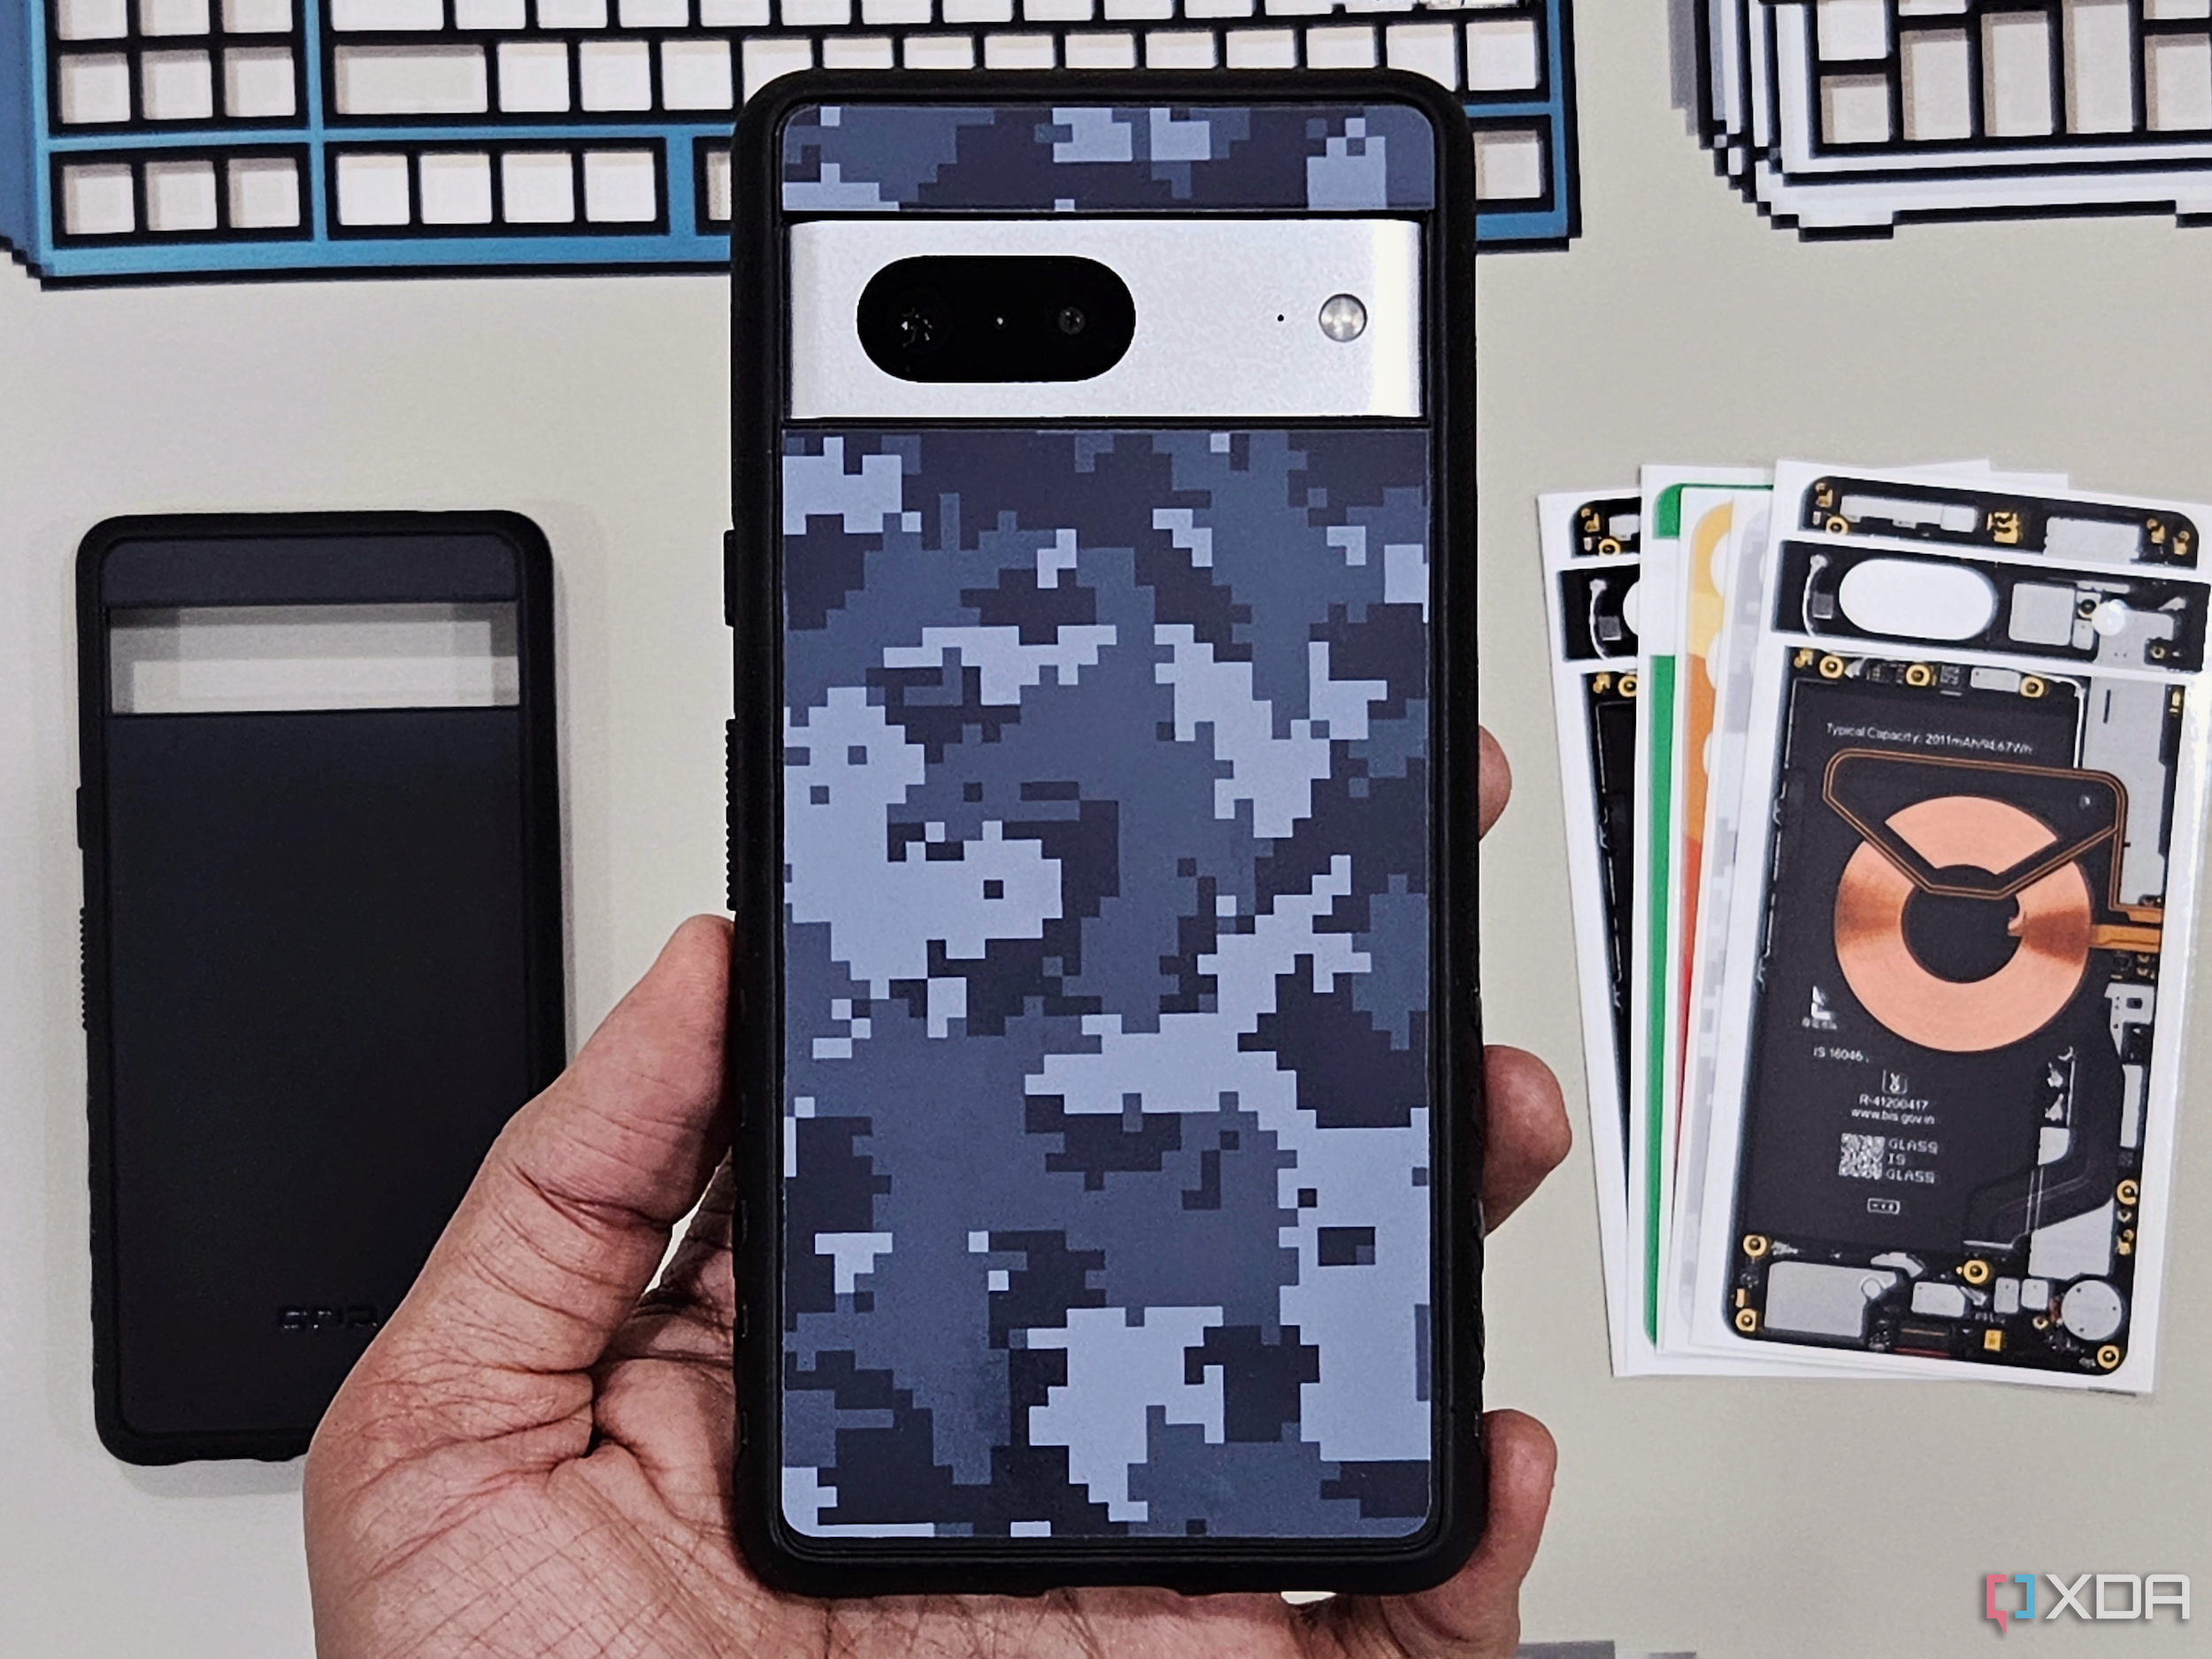 Dbrand Grip case review: Peak protection and personalization